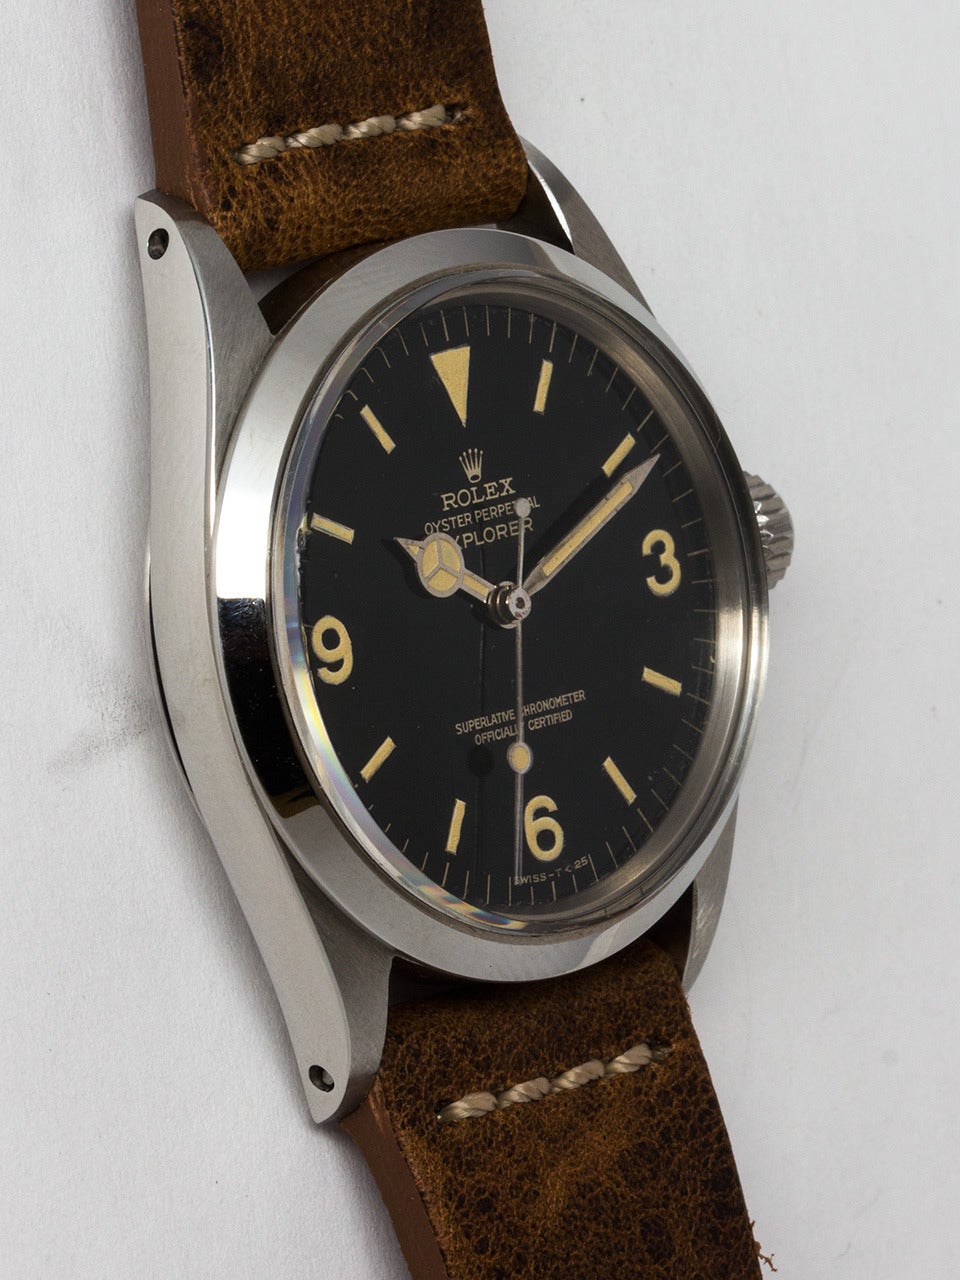 Rolex Stainless Steel Explorer 1 Wristwatch ref 1016, serial # 867,xxx circa 1962. 36mm diameter Oyster case with smooth bezel and acrylic crystal. Glossy black gilt print dial with richly patina'd luminous figures and matching hands. Dial signed